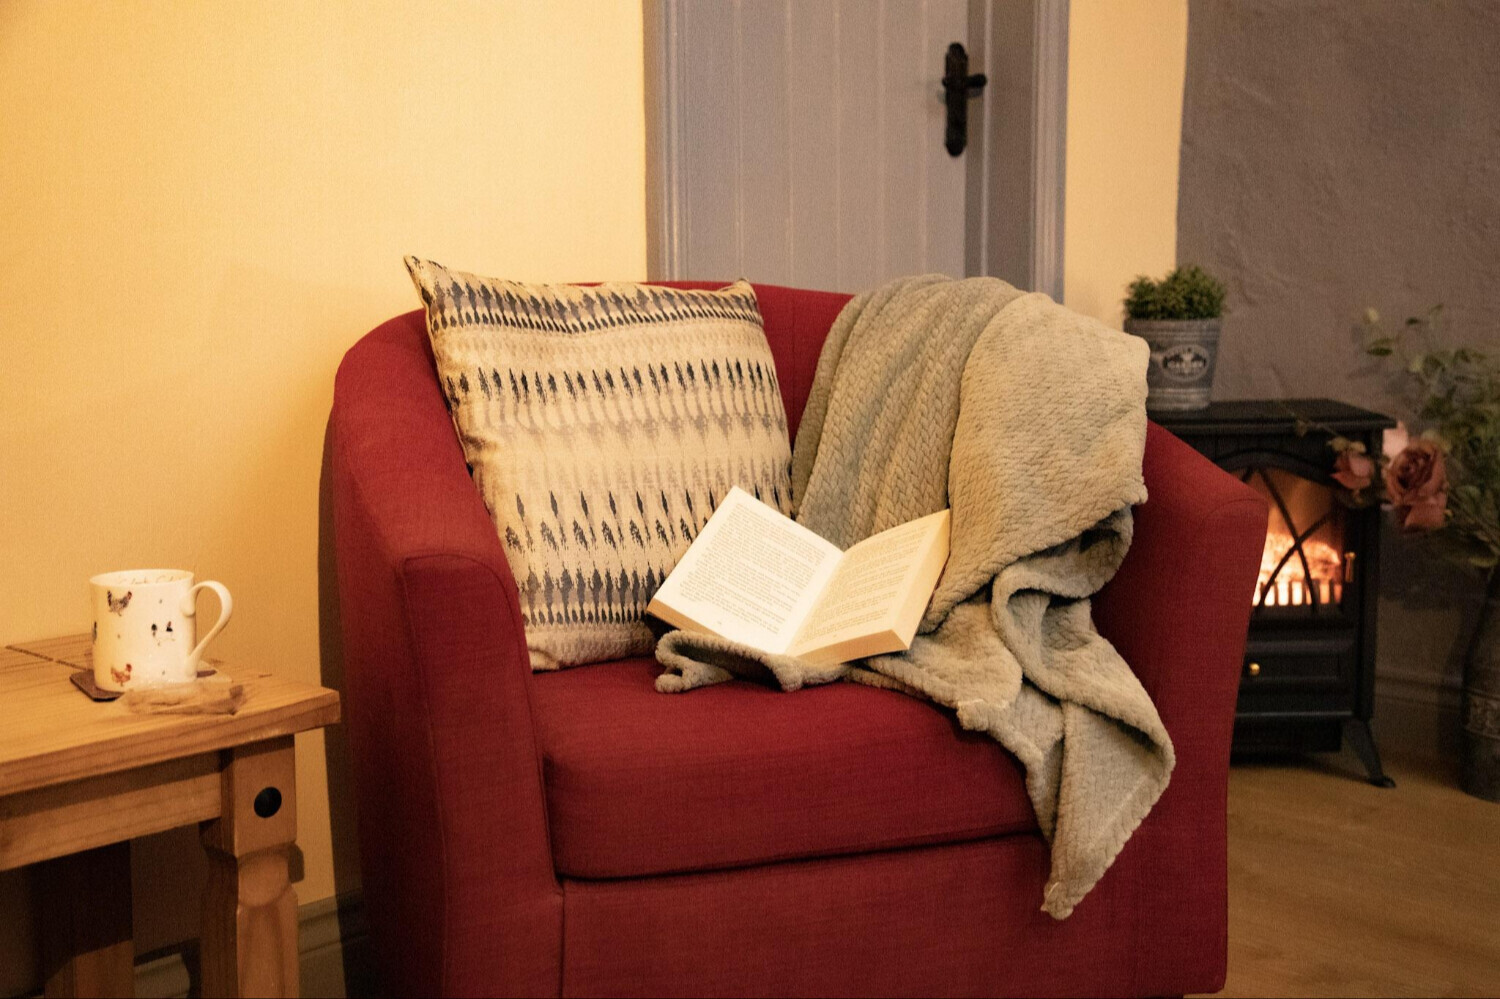 A cosy chair, blanket, and a good book by the fire